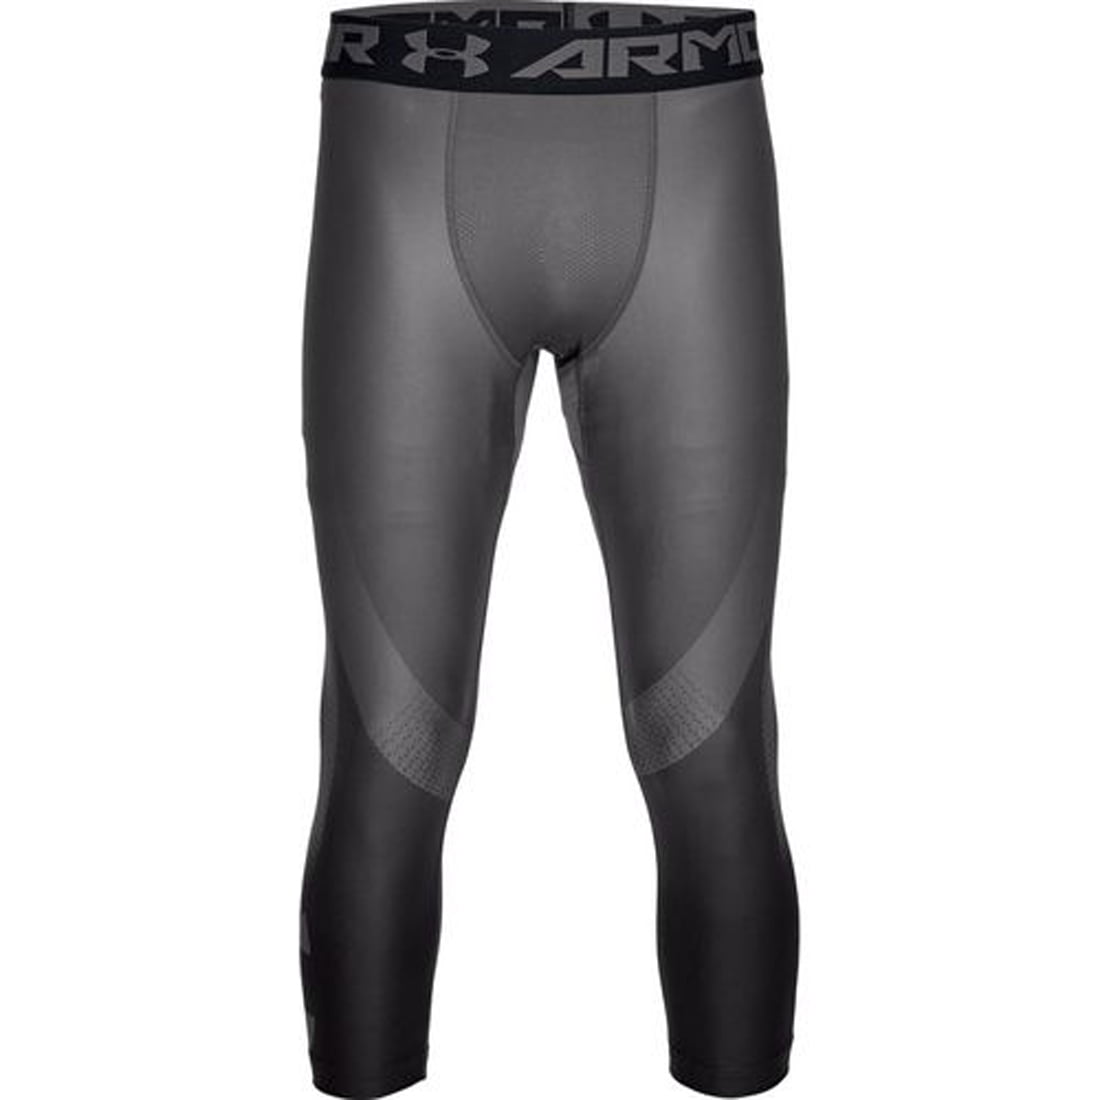 Under Armour HeatGear 2.0 Mens Grey Compression Gym Long Tights Bottoms Pants 